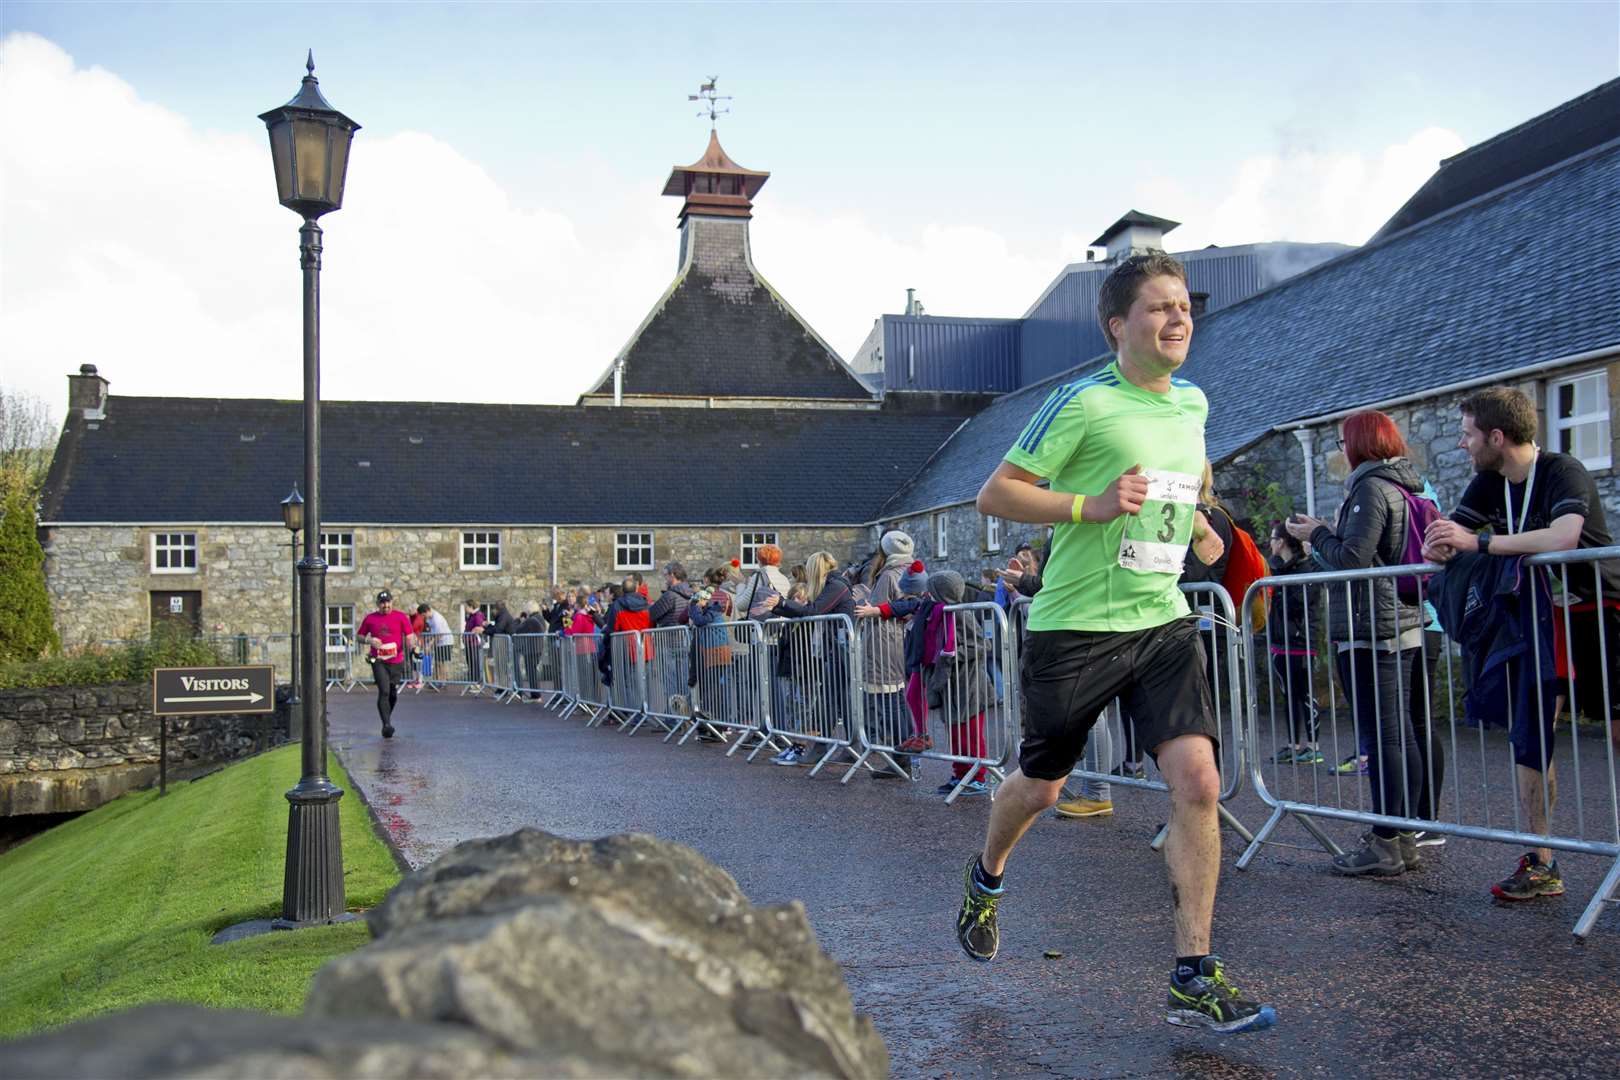 The Dramathon sees runners pass several distilleries on their chosen course – and be rewarded with whisky miniatures at the finish. Picture: Daniel Forsyth/SPP